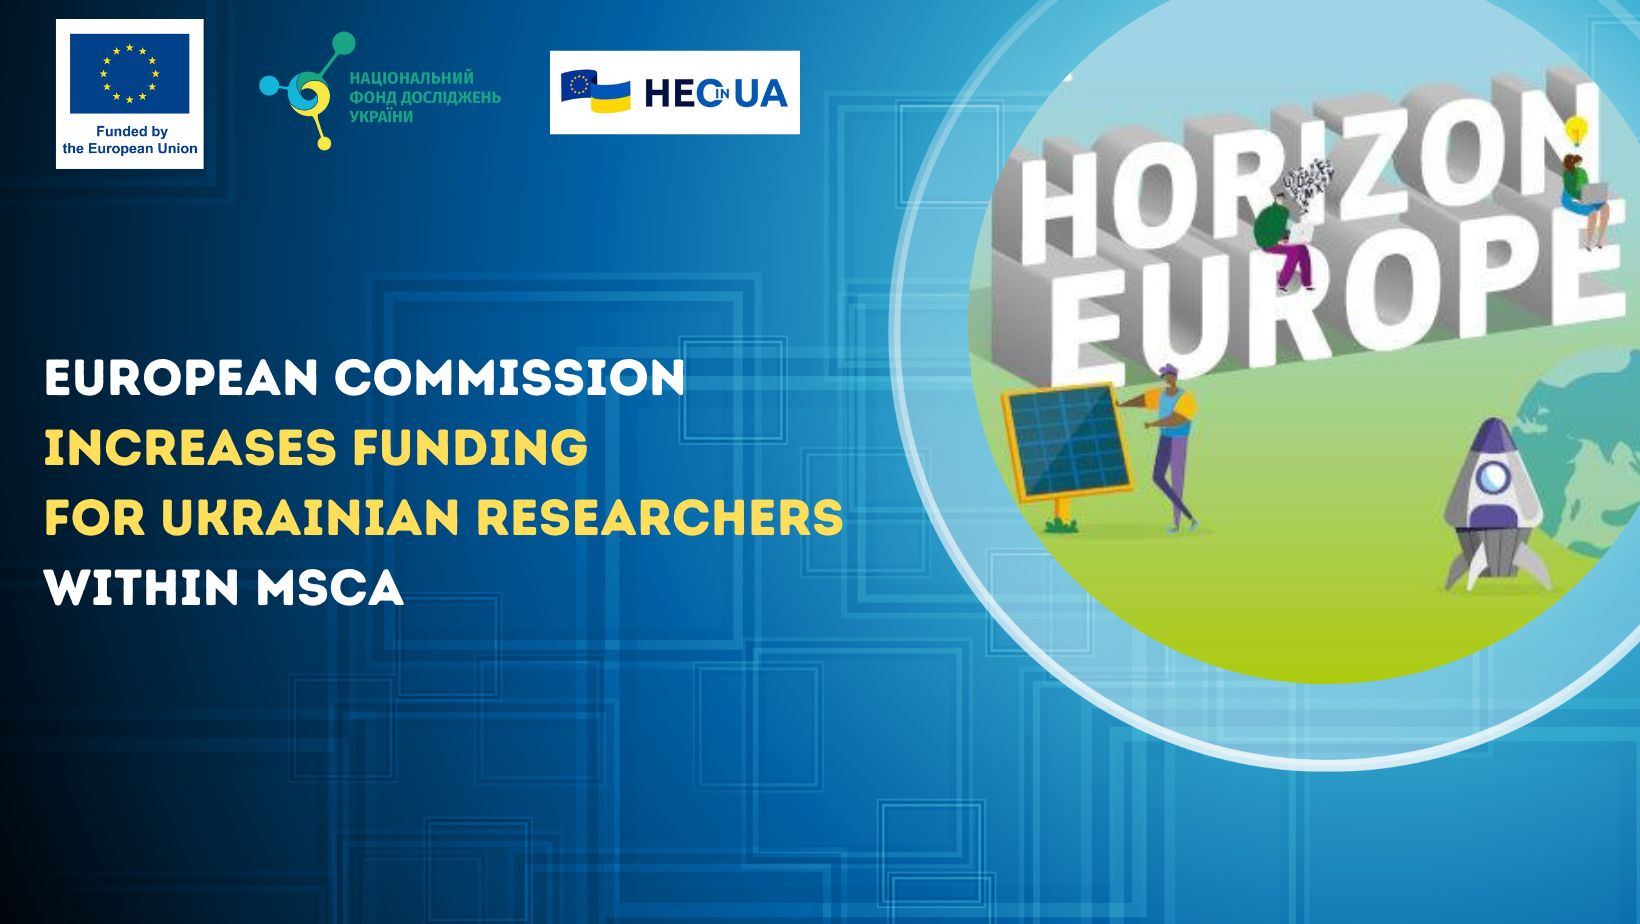 European Commission increases funding for Ukrainian researchers within MSCA